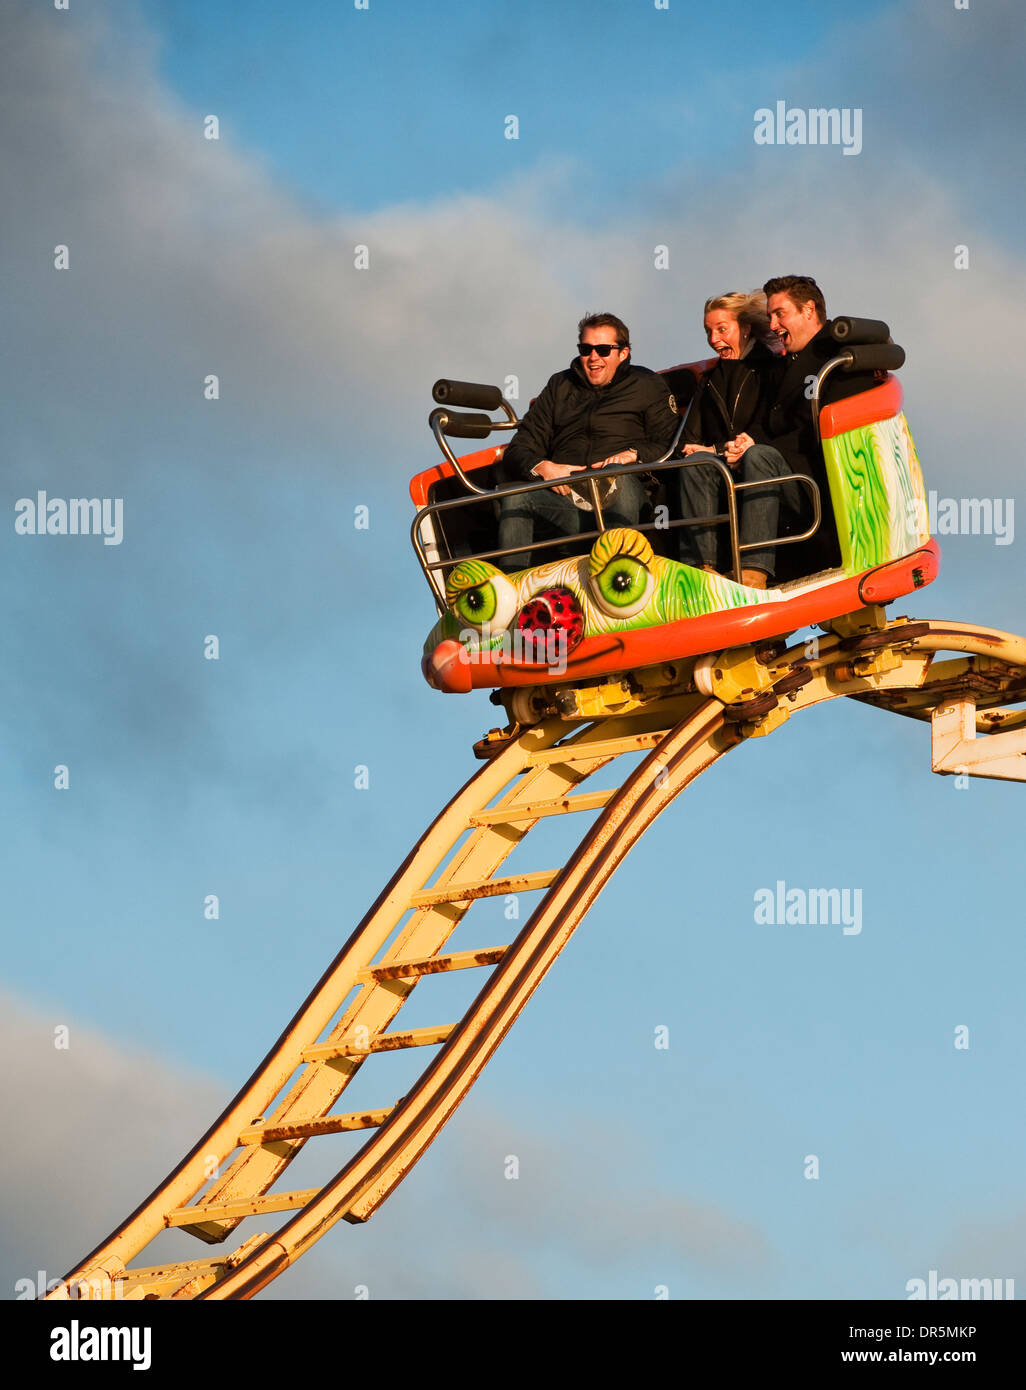 Three people on the Crazy Mouse roller coaster ride on Brighton Pier, UK Stock Photo